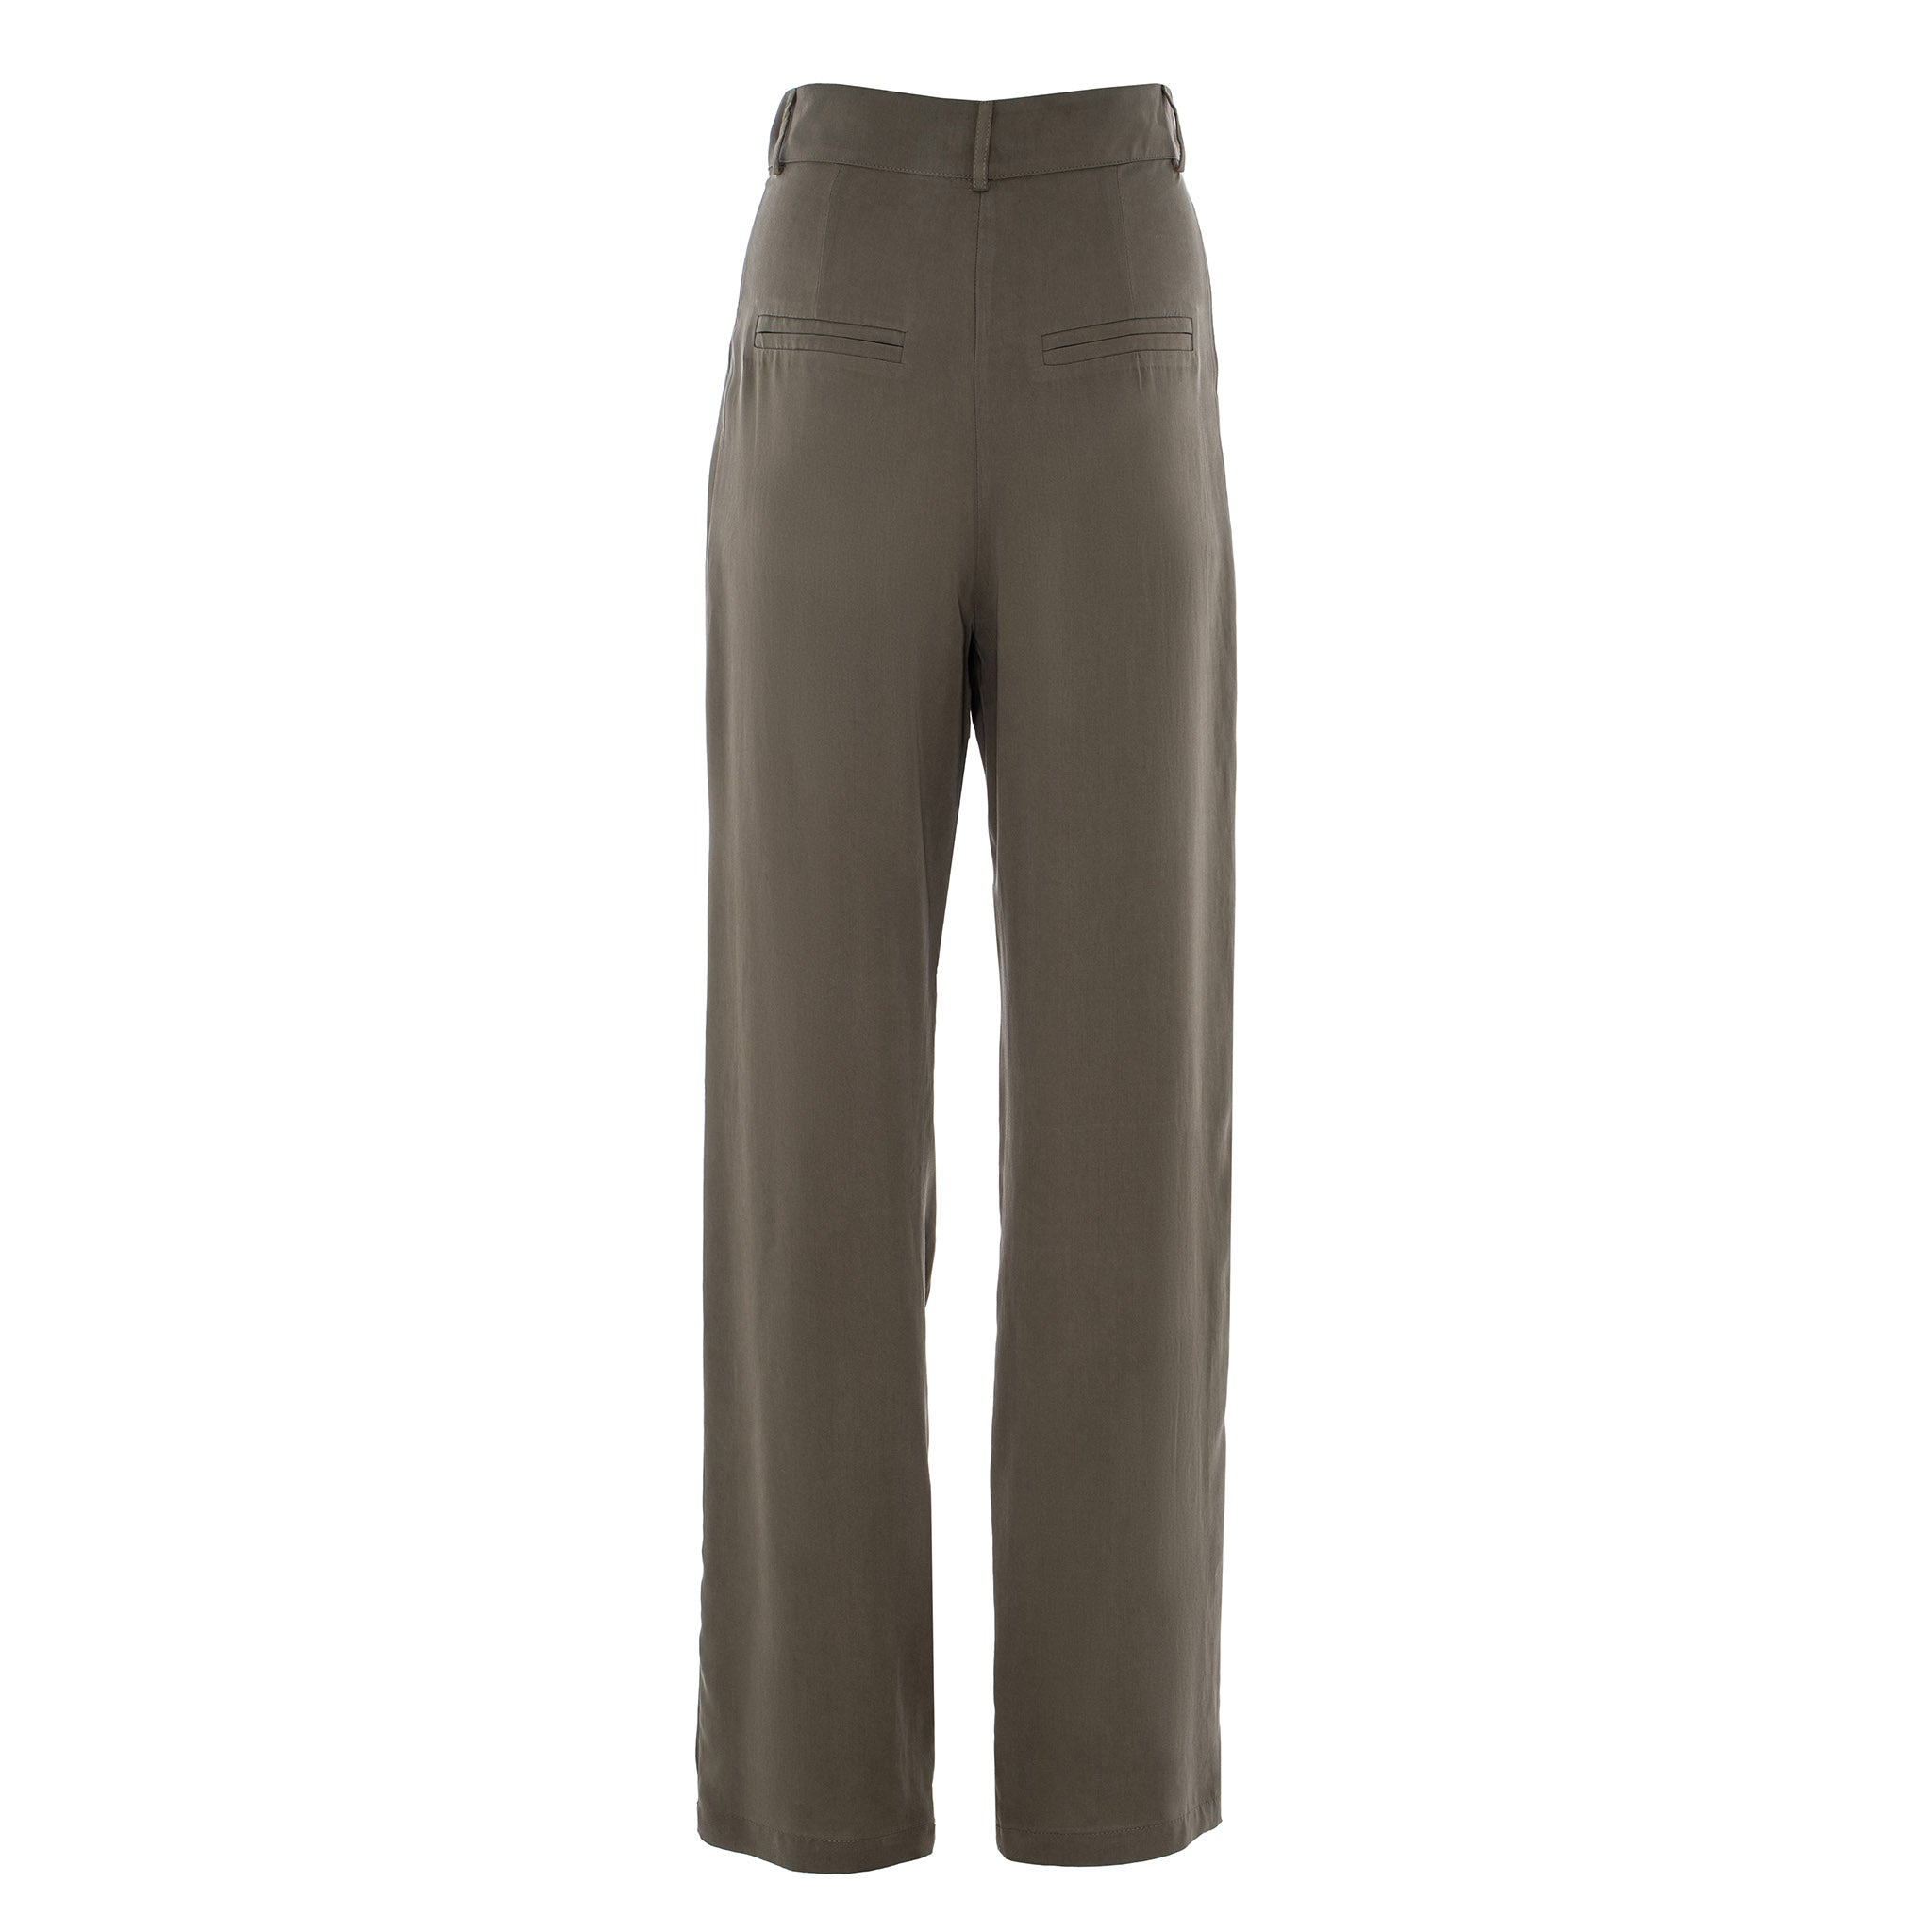 FULL LENGTH TROUSERS IN OLIVE GREEN